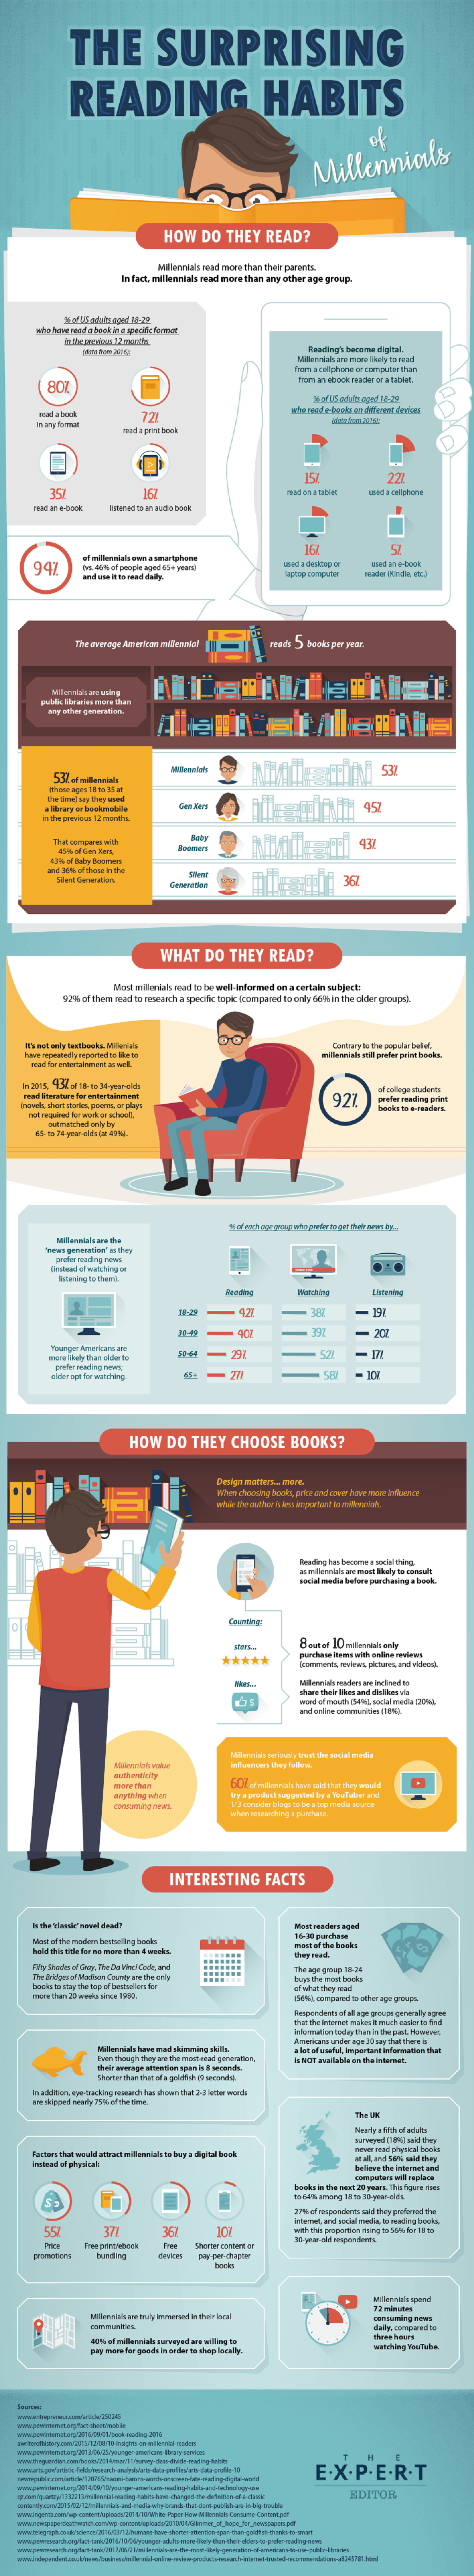 the-surprising-reading-habits-of-millennials-infographic